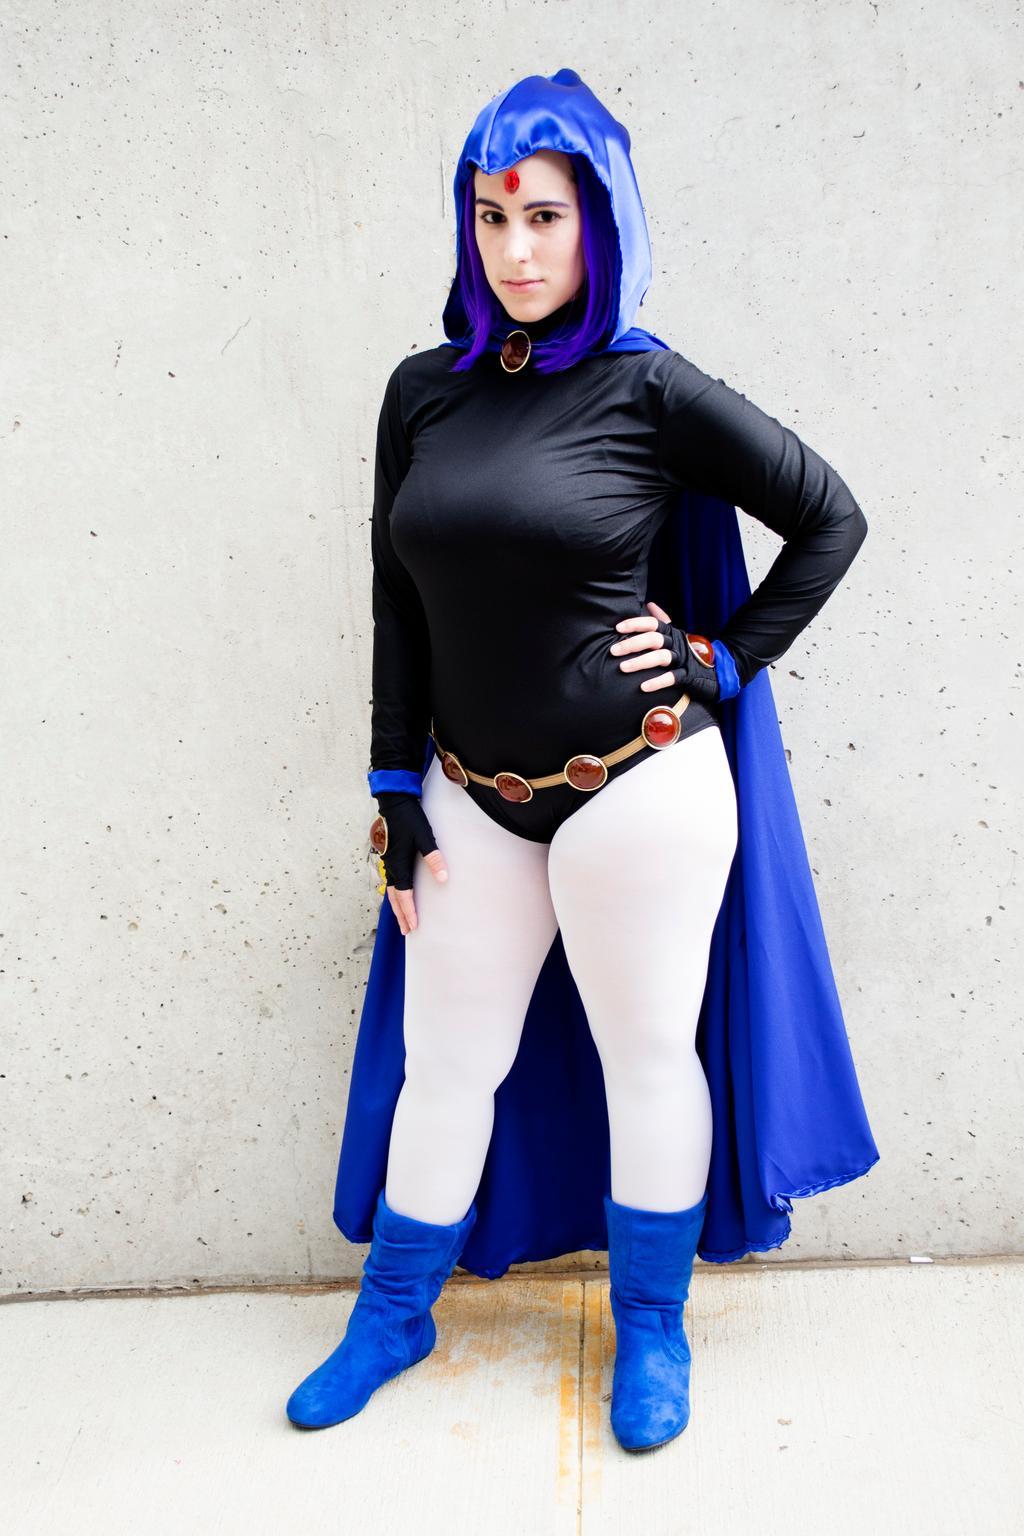 50+ Hot Pictures Of Raven From Teen Titans, DC Comics. 24